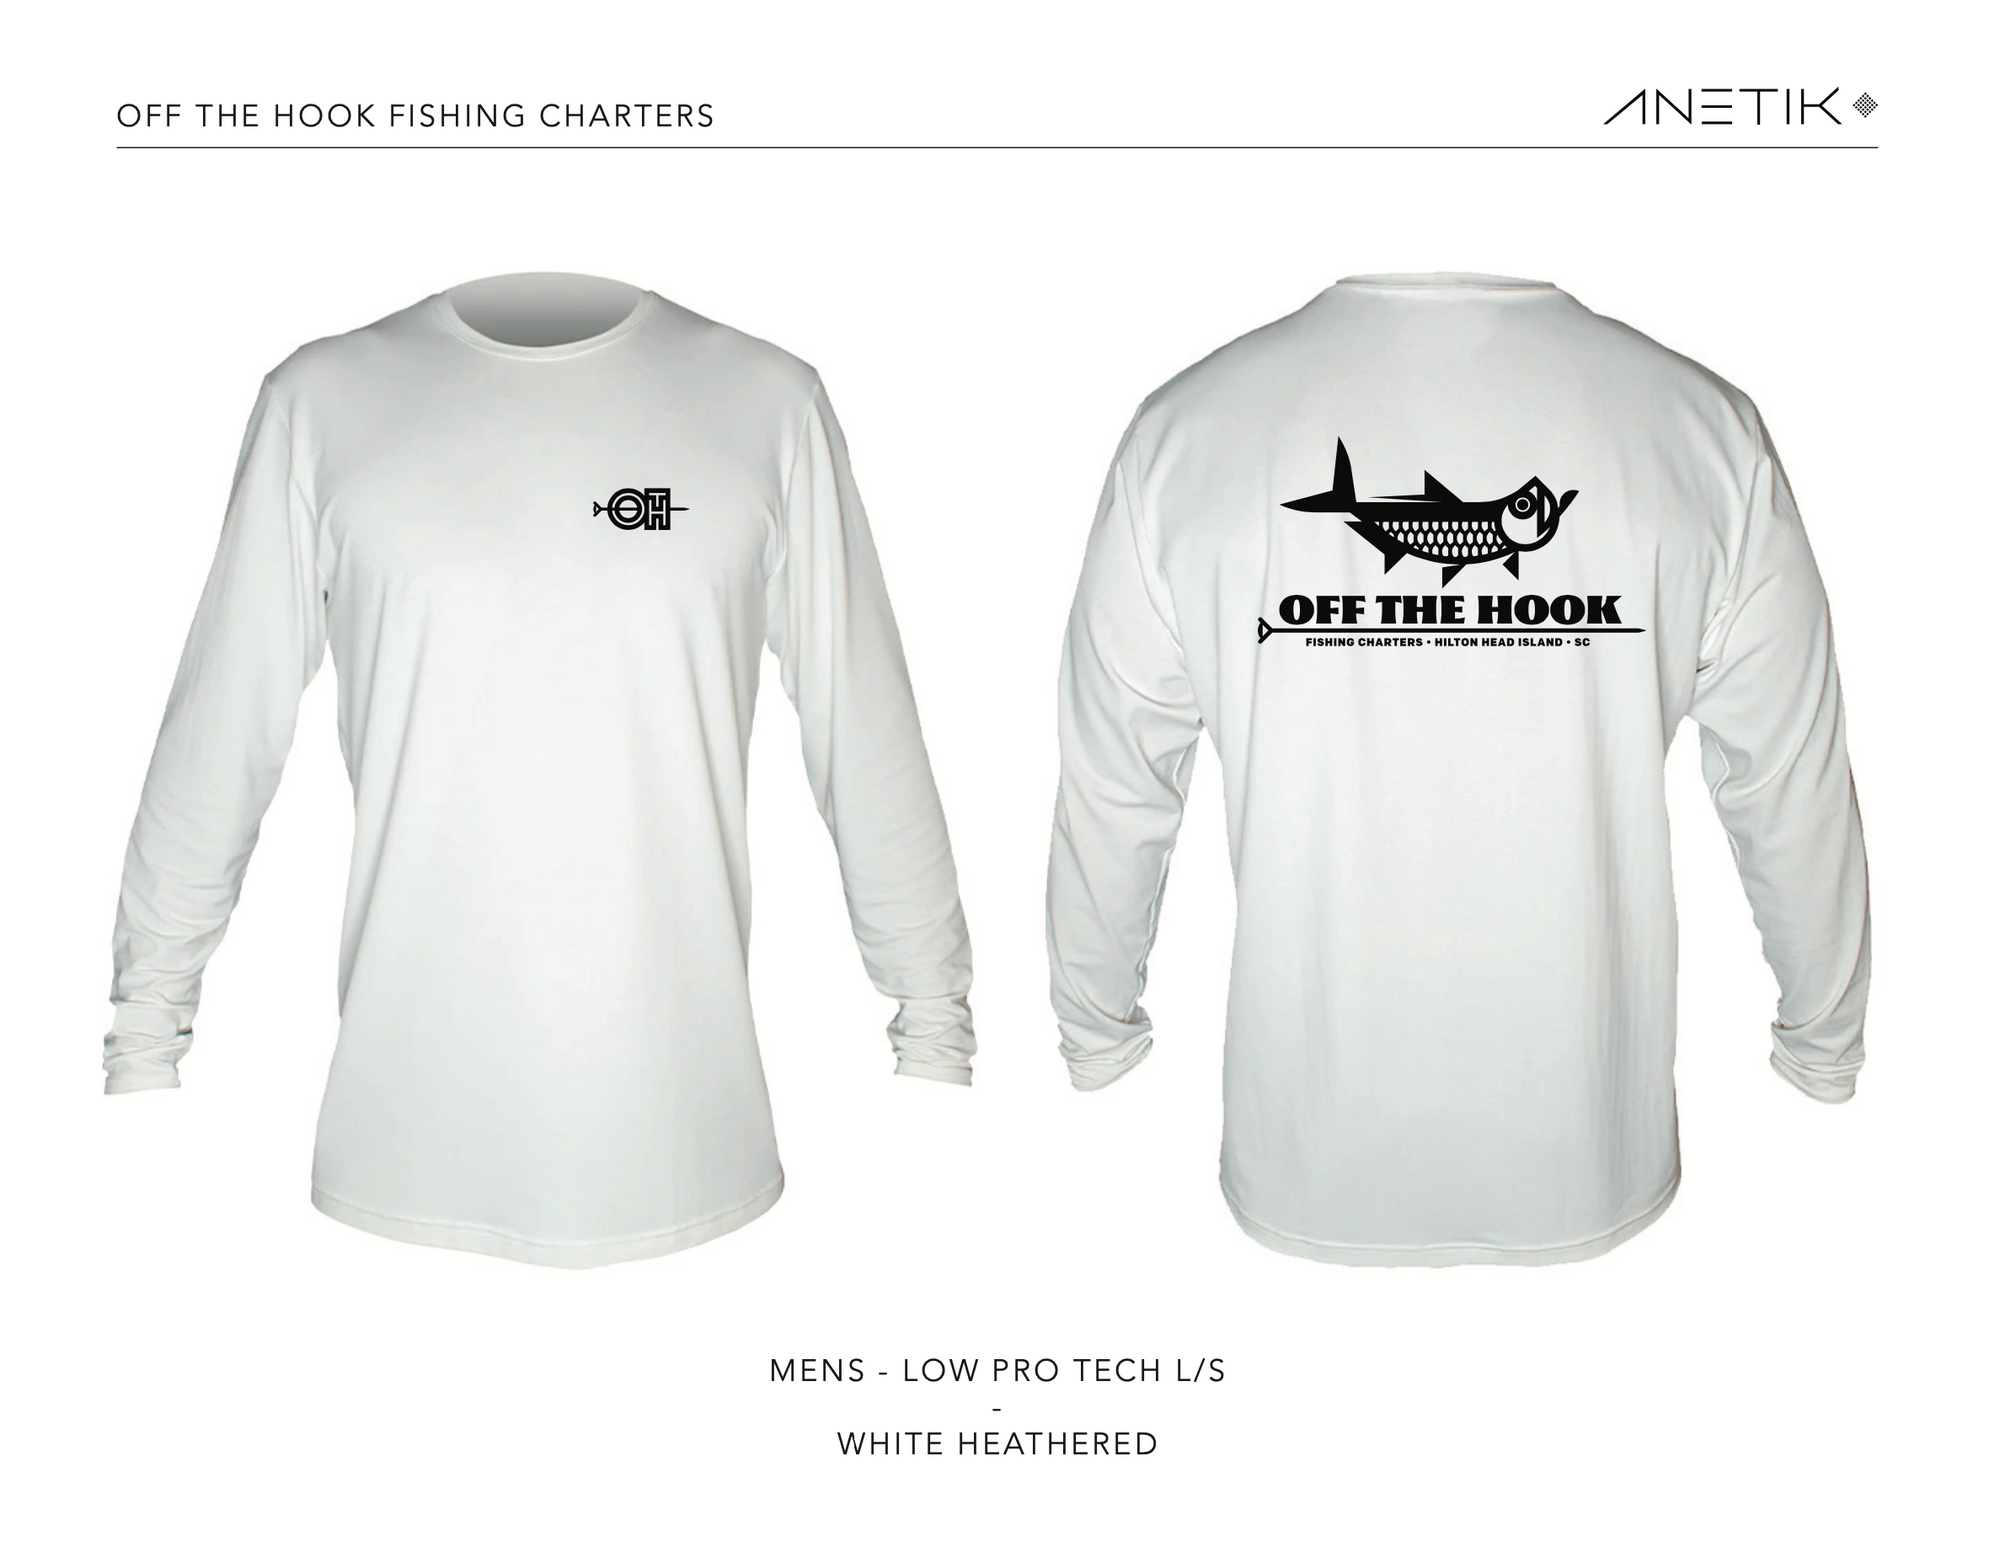 OFF THE HOOK - ANETIK - LOW PRO TECH L/S - SKY HEATHERED - Off The